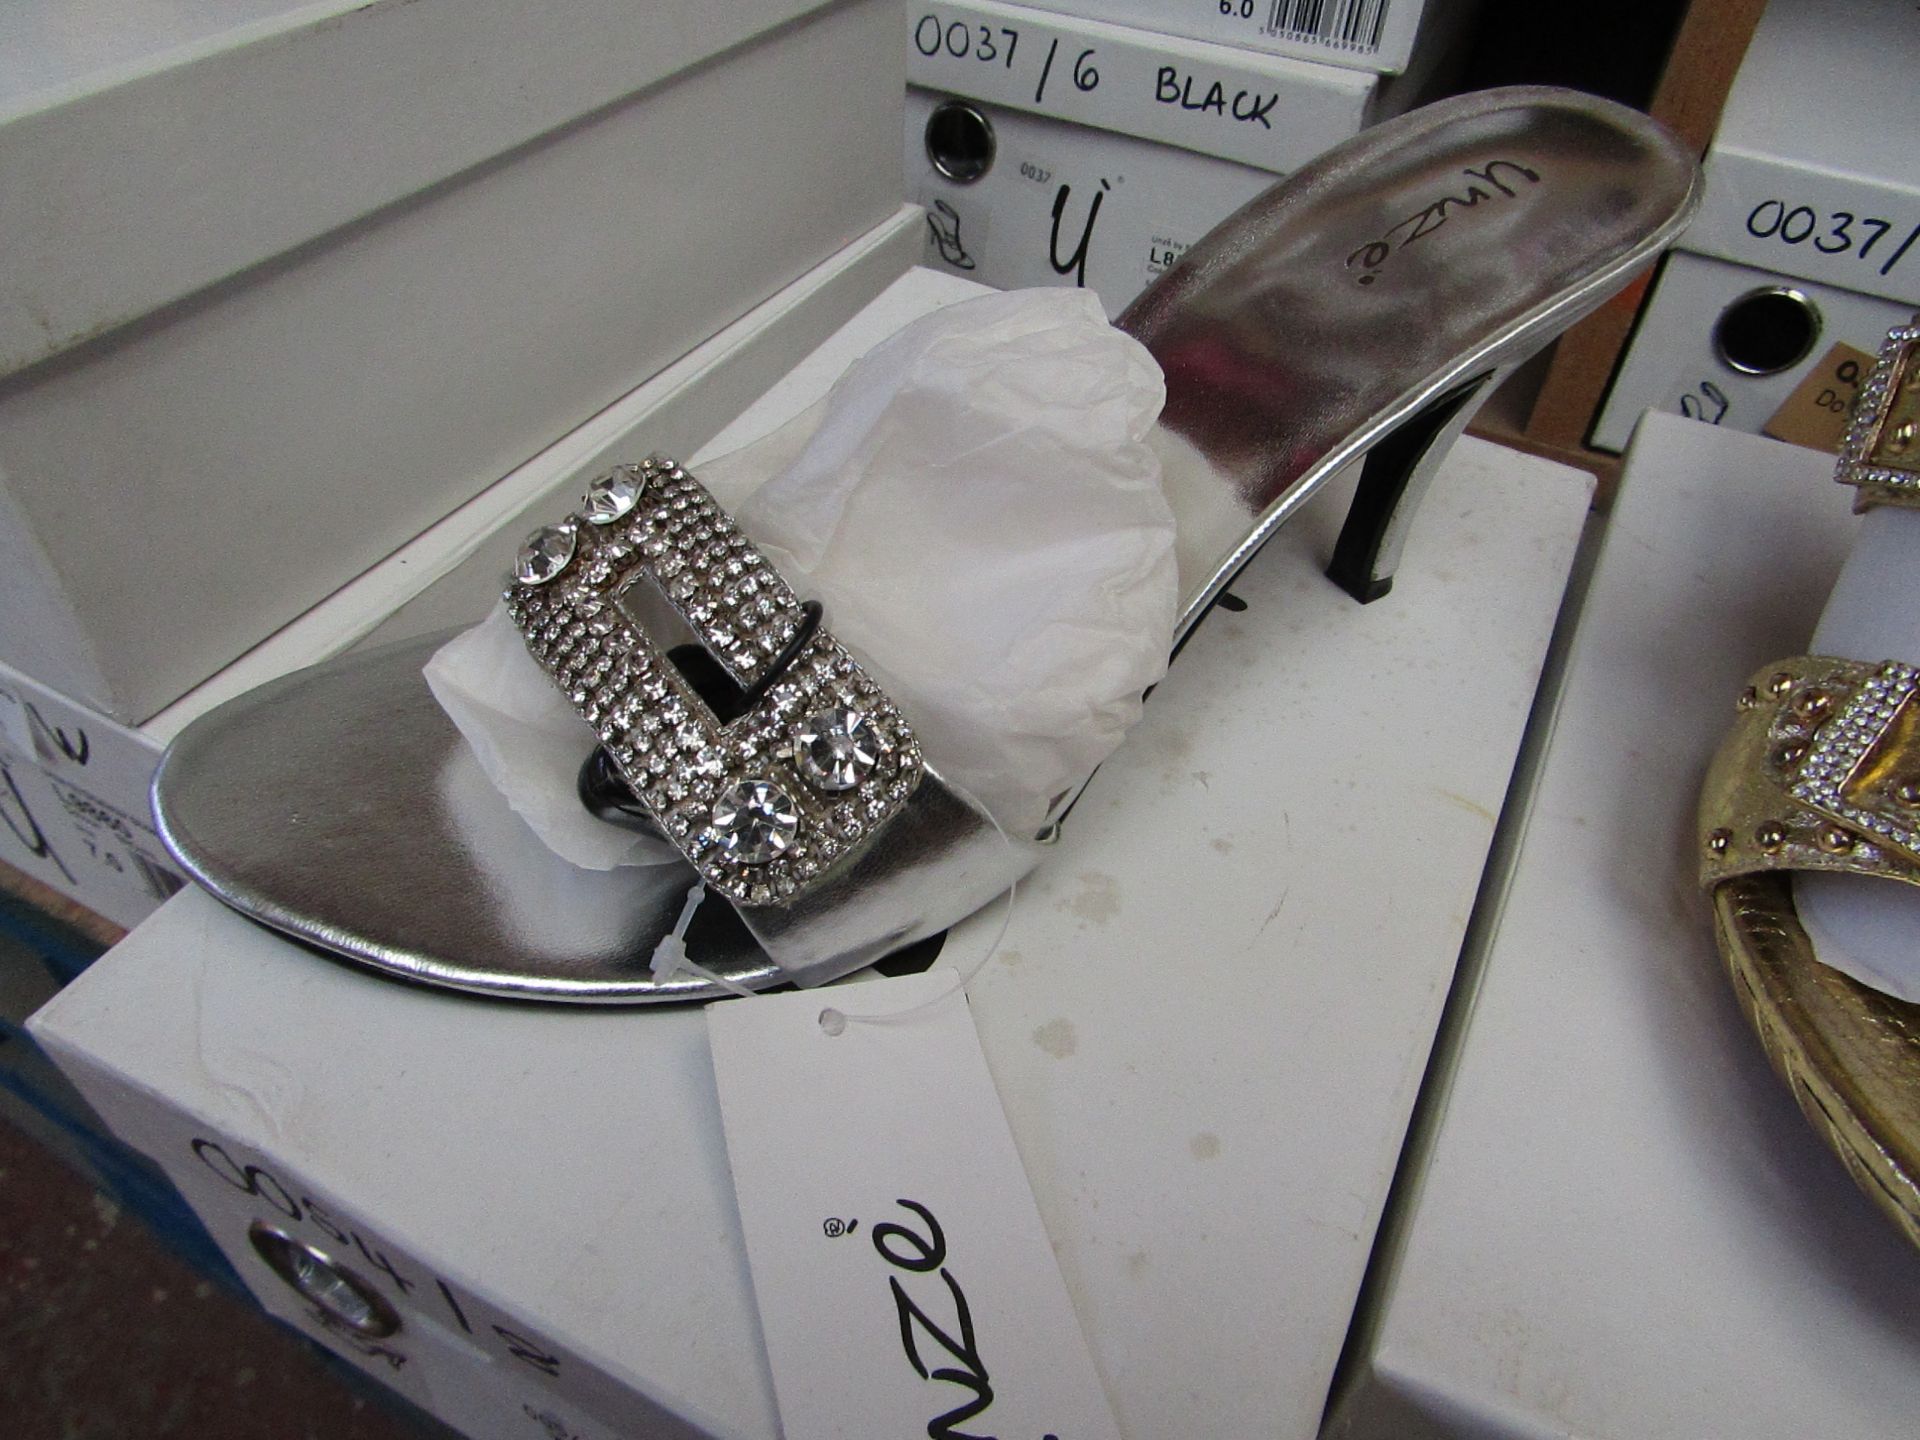 Unze by Shalamar Shoes Ladies Silver & Diamante Shoes size  new & boxed see image for design